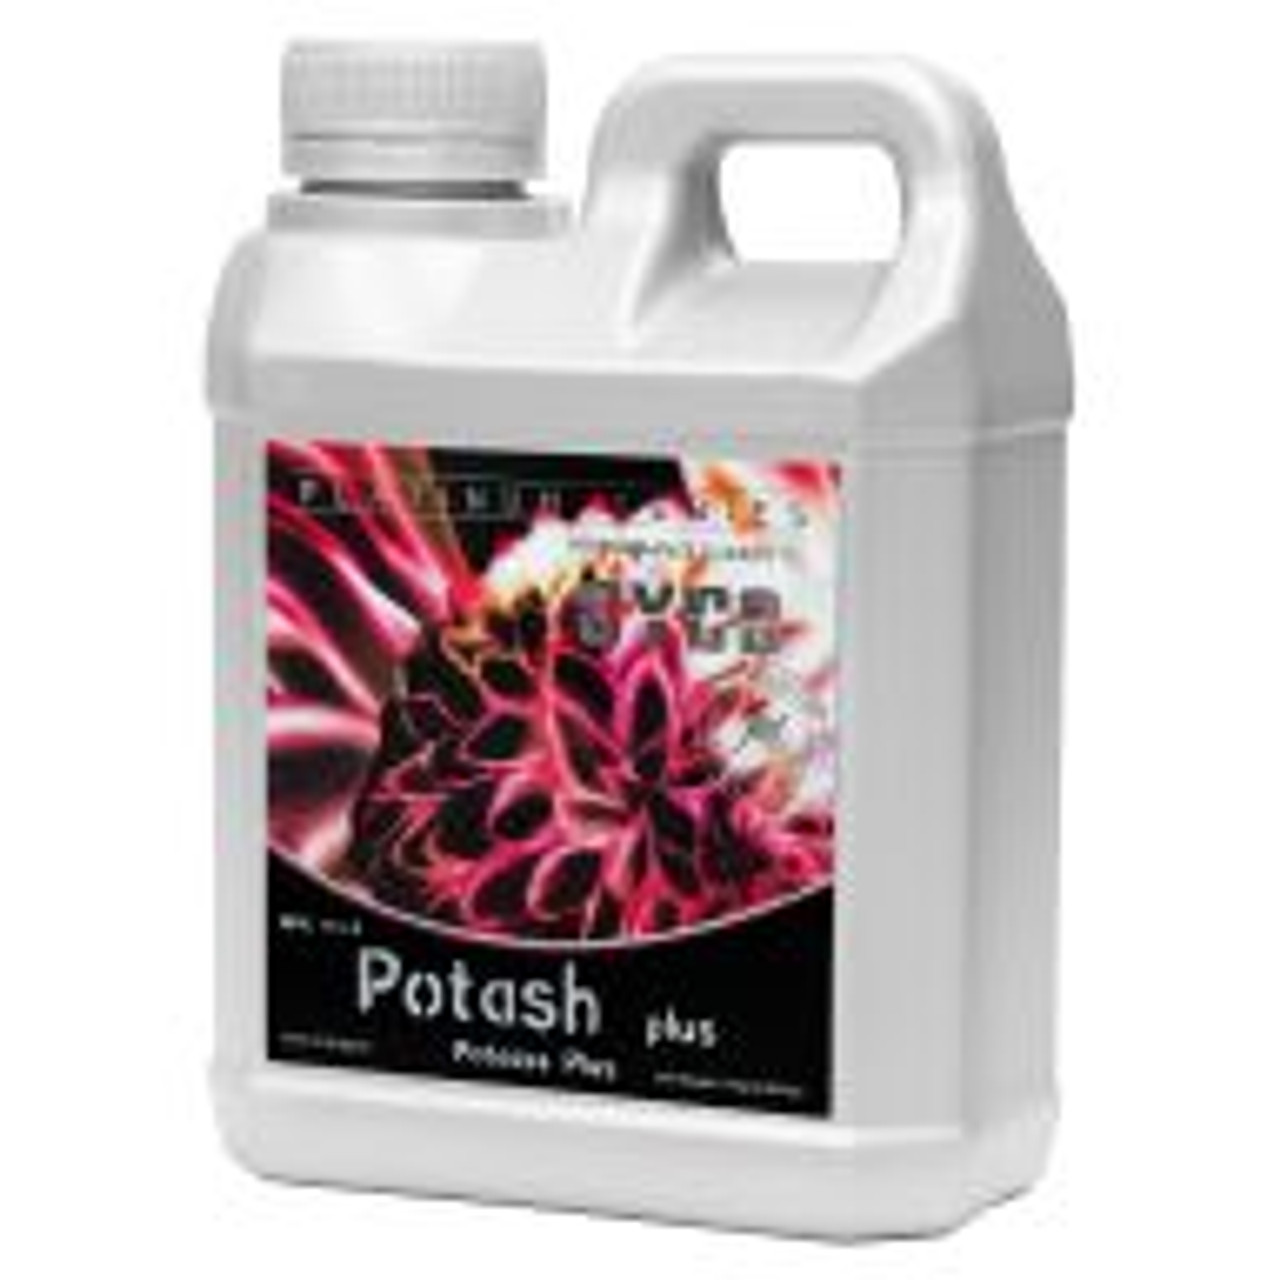 Cyco Potash Plus (0-4-6) aids in achieving full, high-quality yields. It helps get nutrients and sugars from leaves to plant storage organs, improving overall plant health.